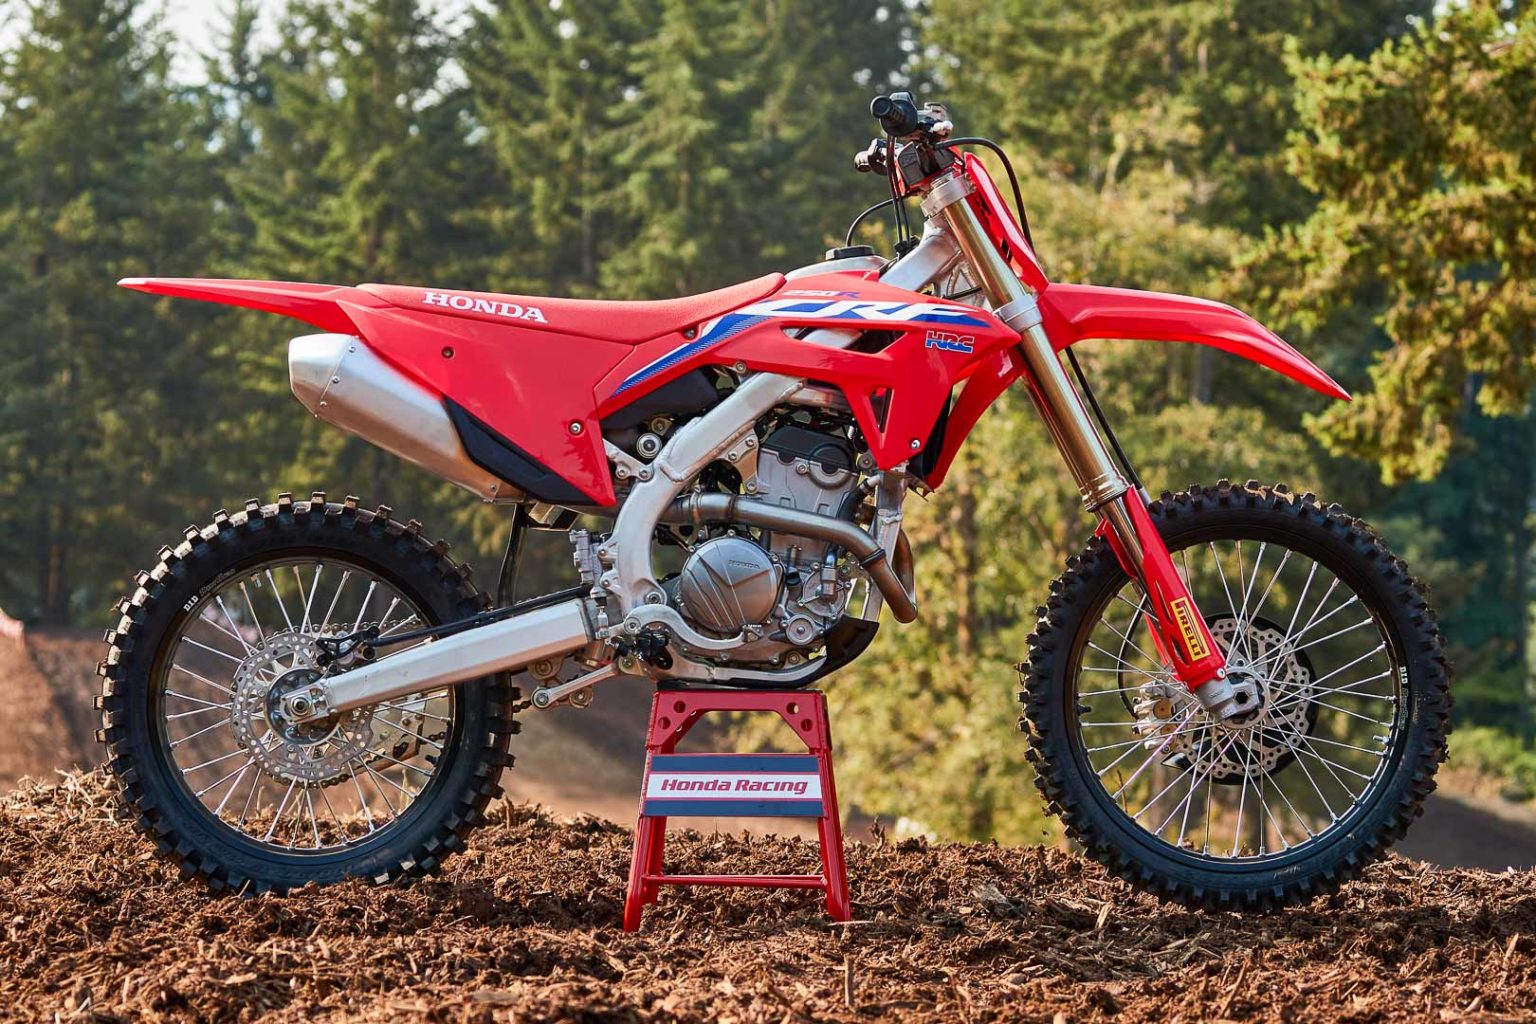 2022 Honda Crf250r Review 13 Fast Facts For Motocross Racing 8858